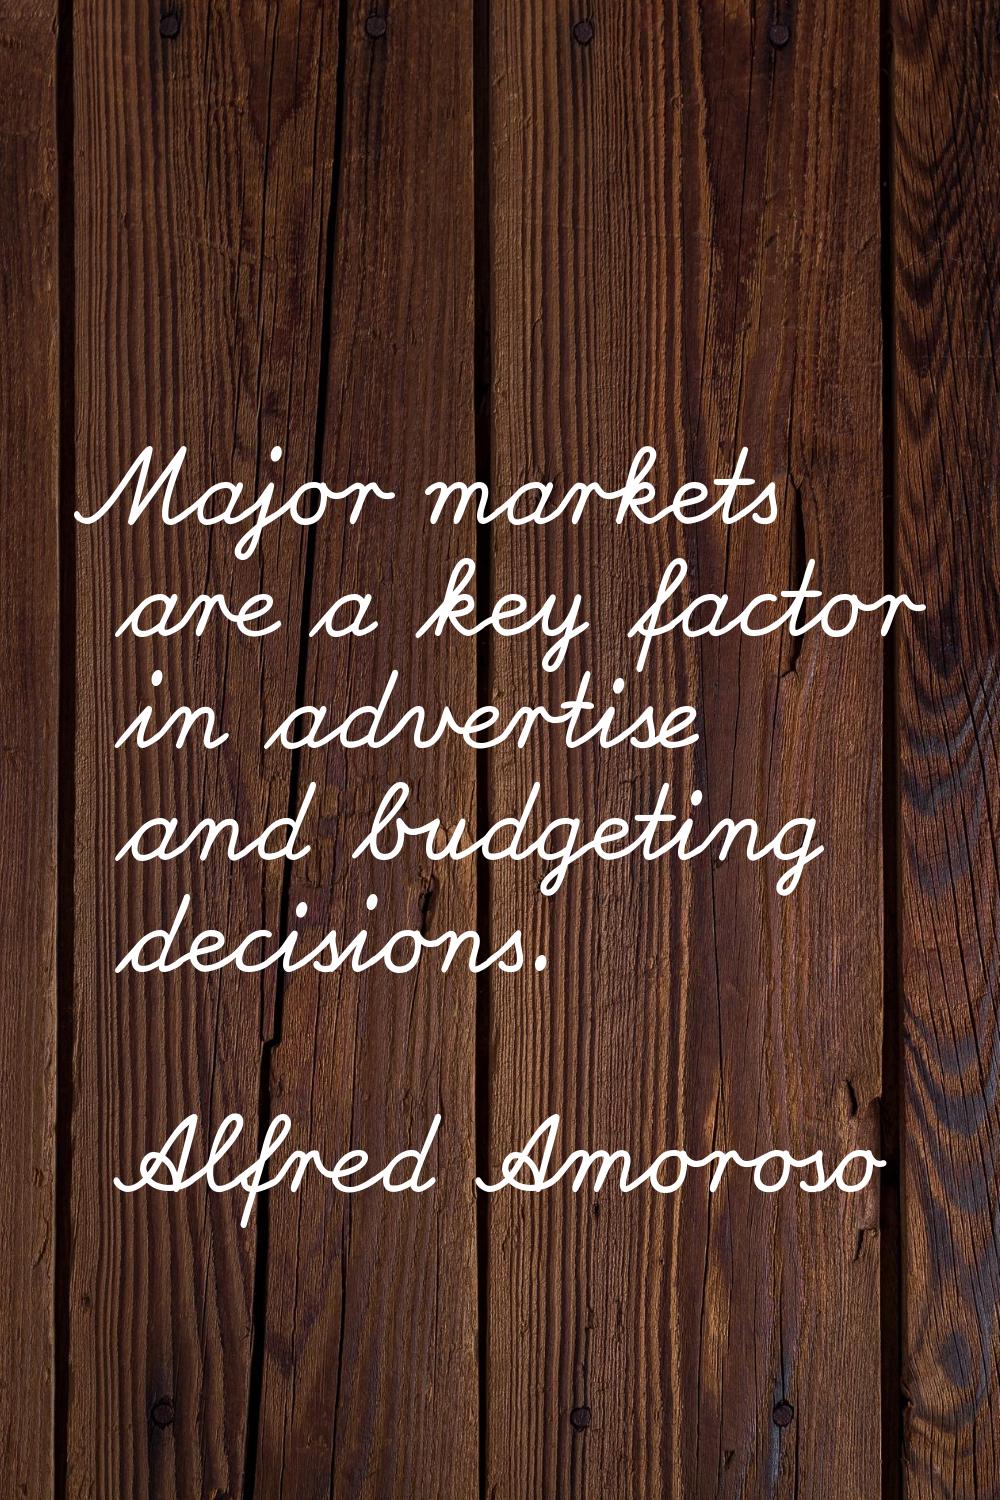 Major markets are a key factor in advertise and budgeting decisions.